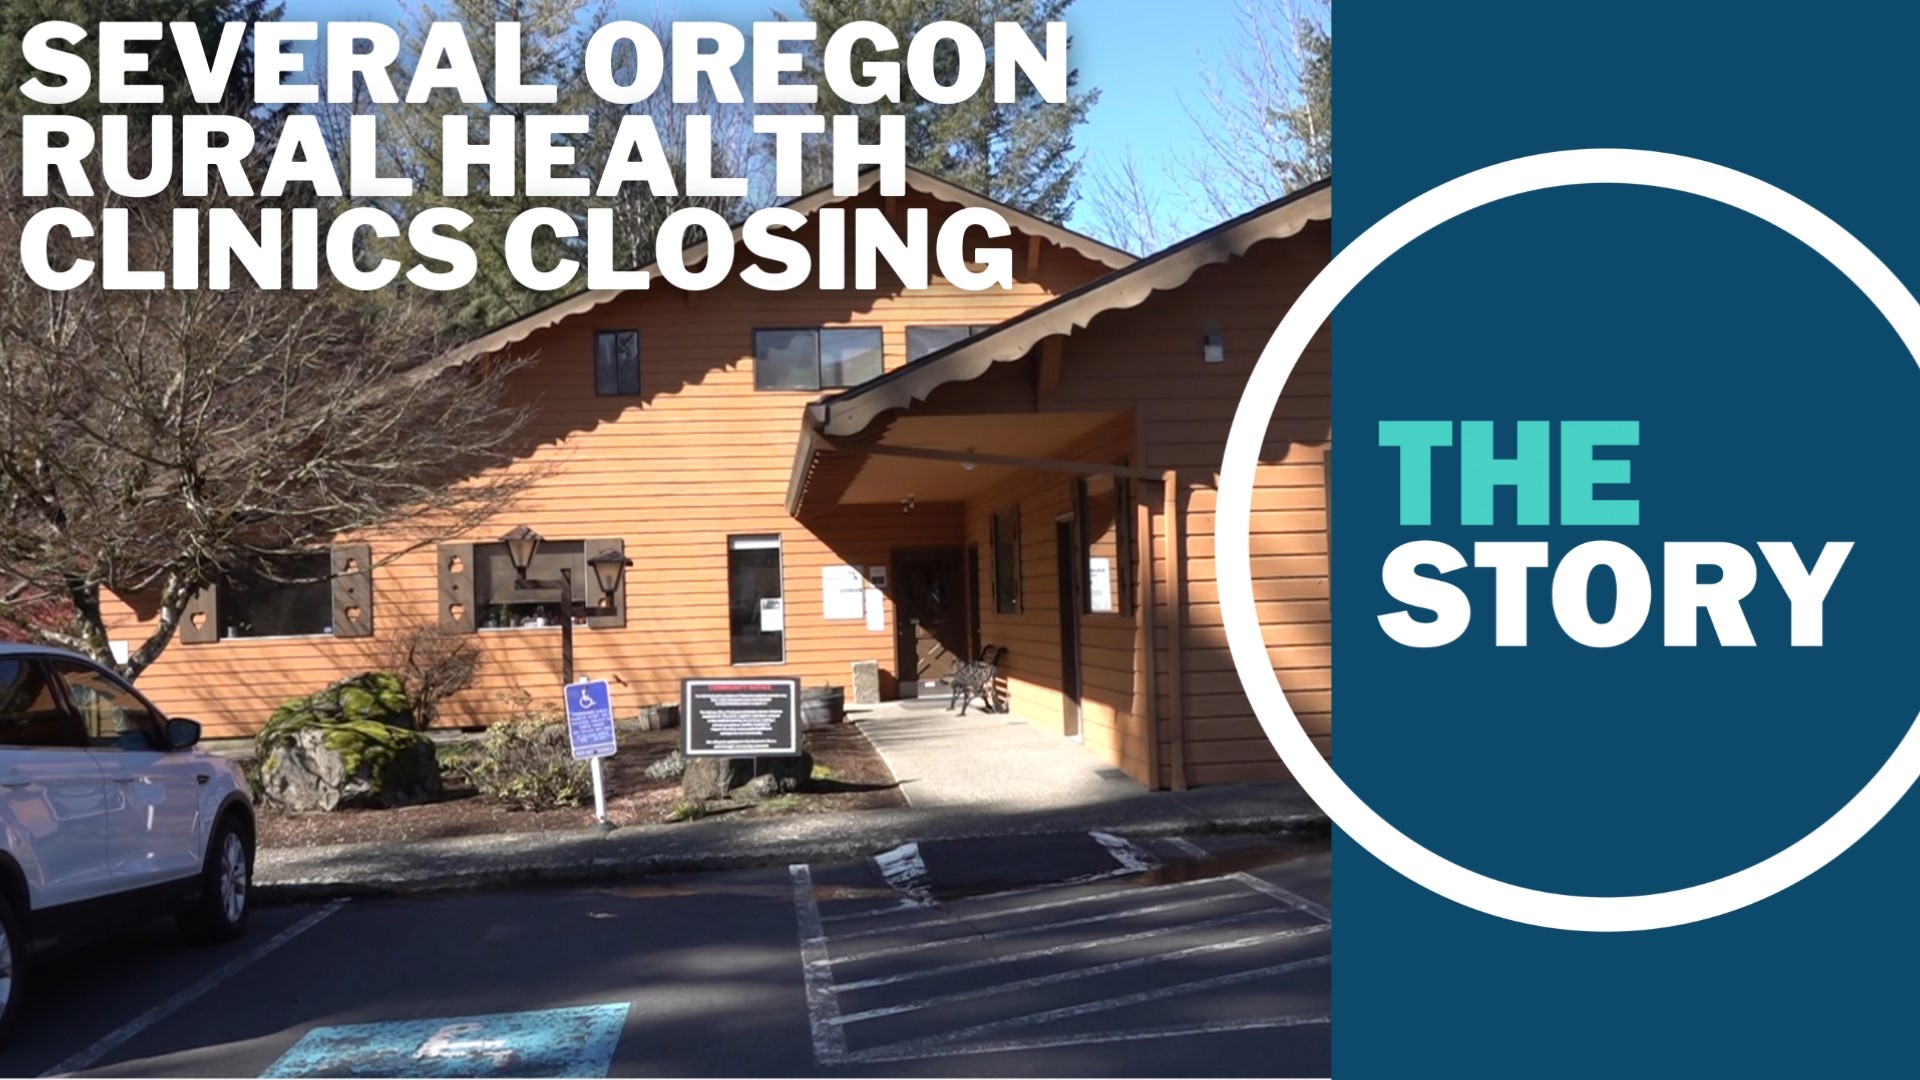 Adventist Health Tillamook said it had no choice but to close the clinics due to long-standing staffing issues, a problem that’s plagued rural clinics nationwide.